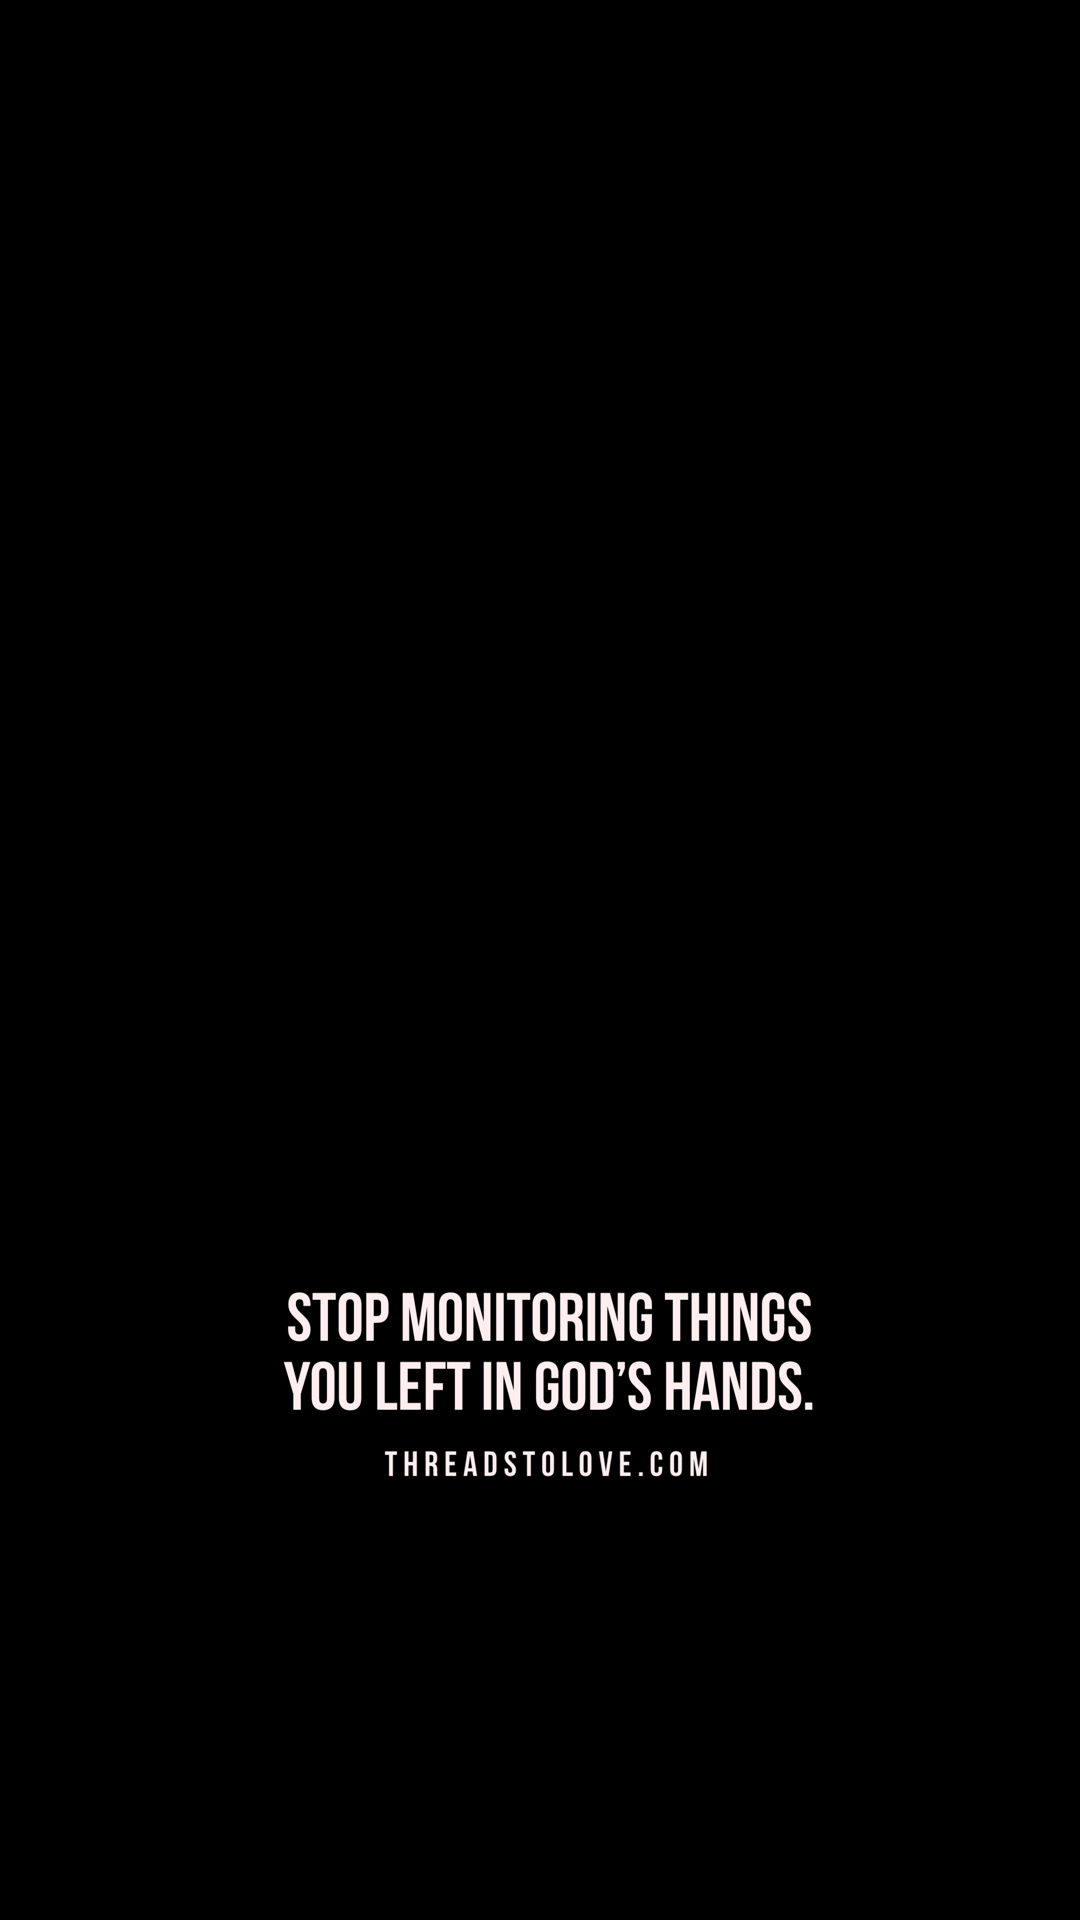 Stop monitoring things you left in God's hands. Trust His timing